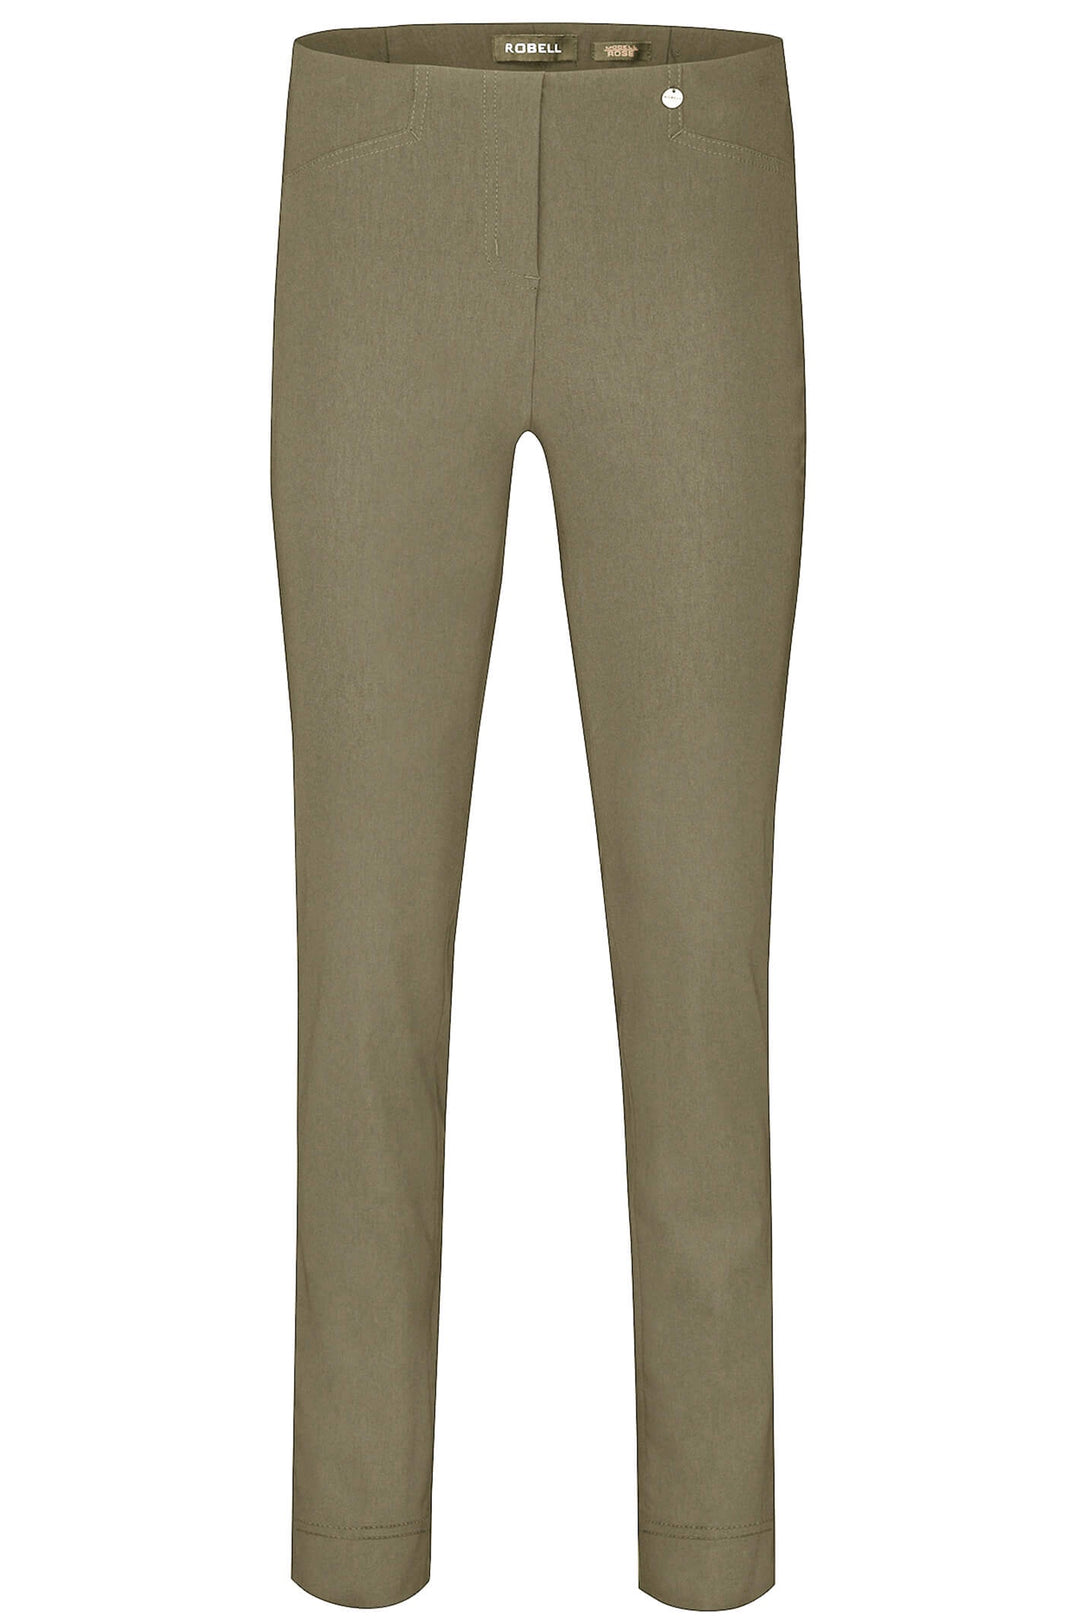 Robell 51673-5499-17 Rose Taupe Full Length Slim Fit Trousers - Dotique